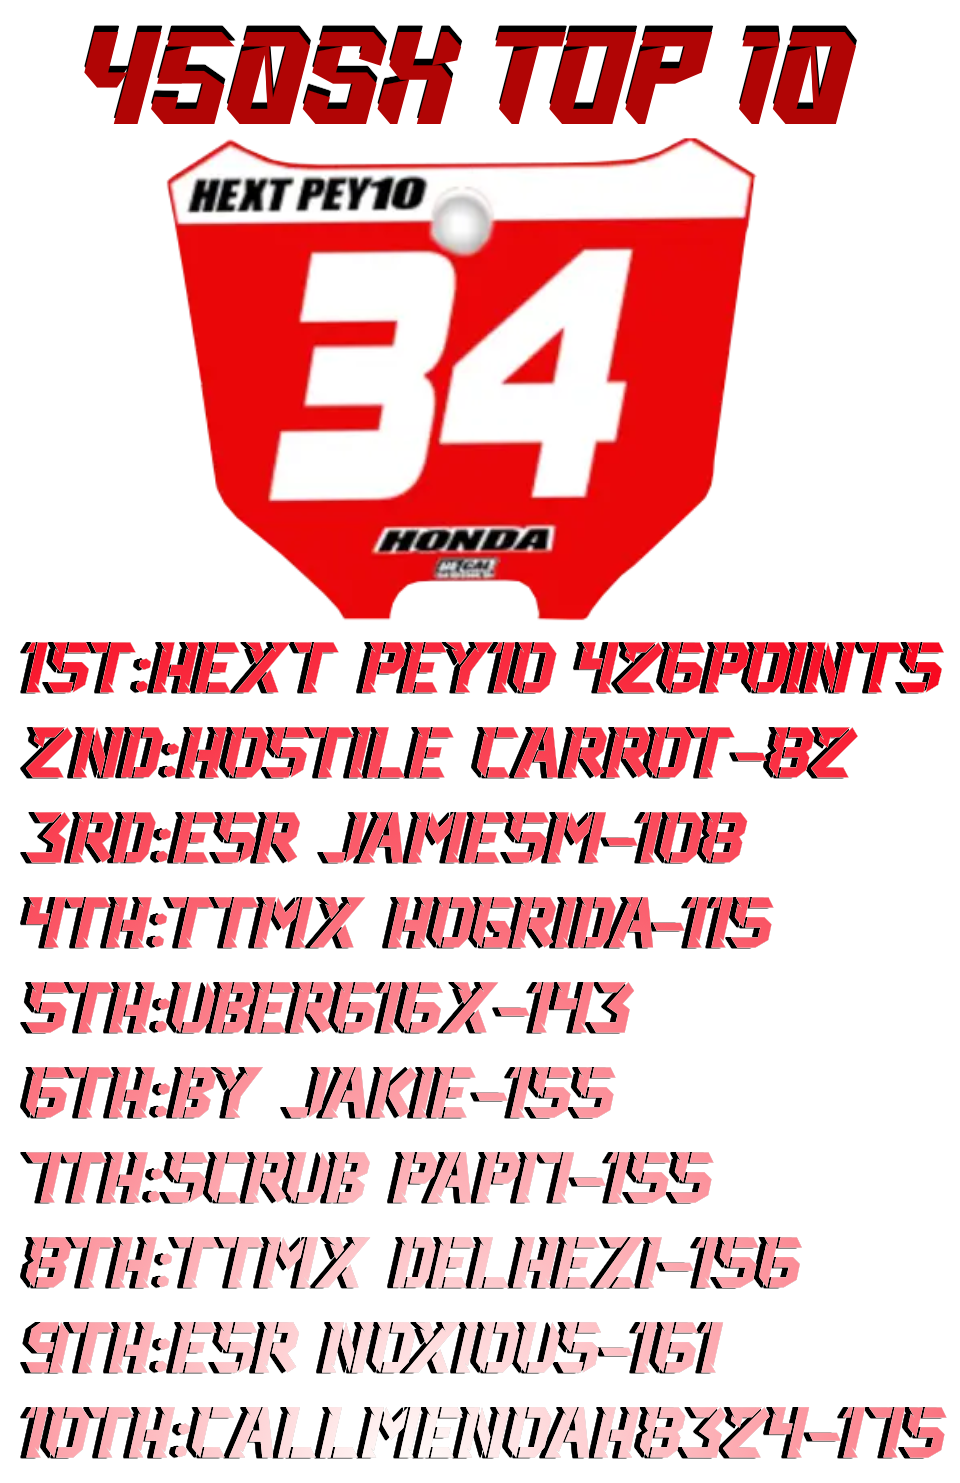  450 Points Leaders